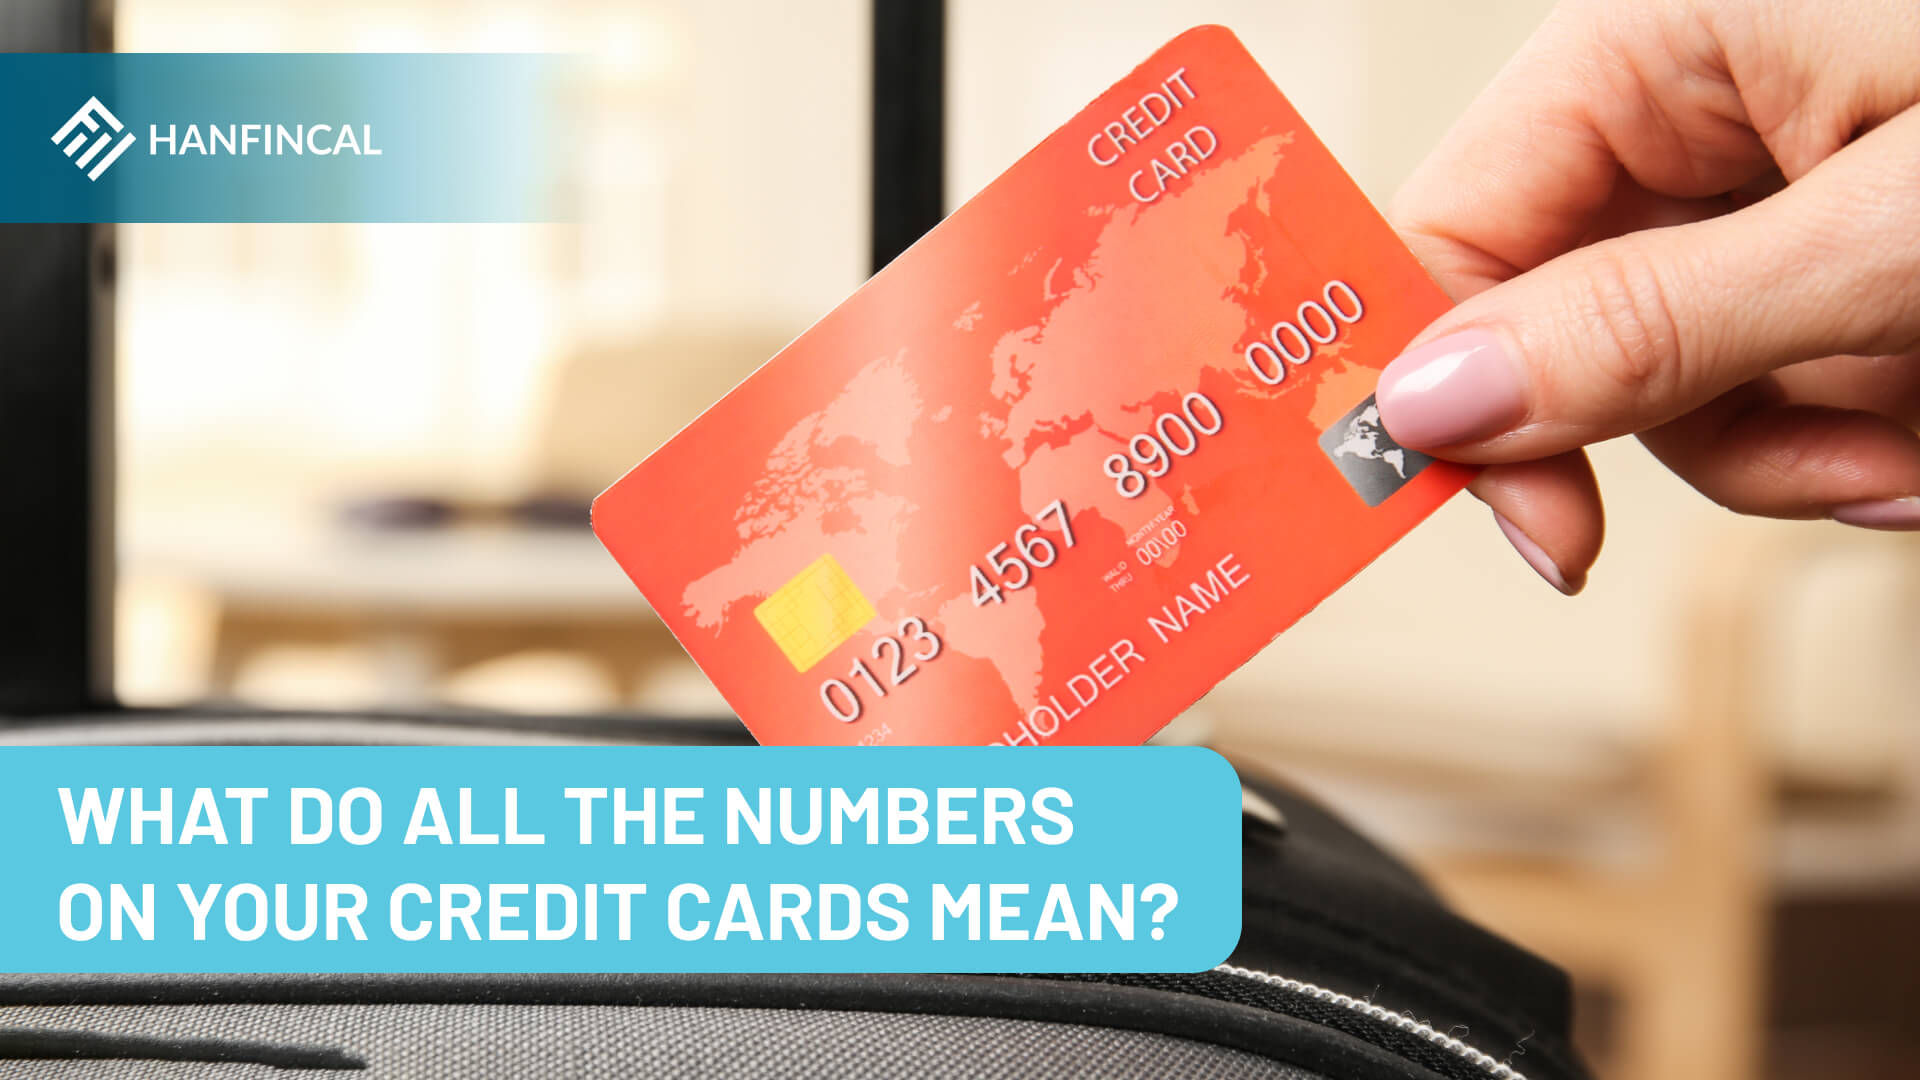 What do the numbers on credit cards mean?